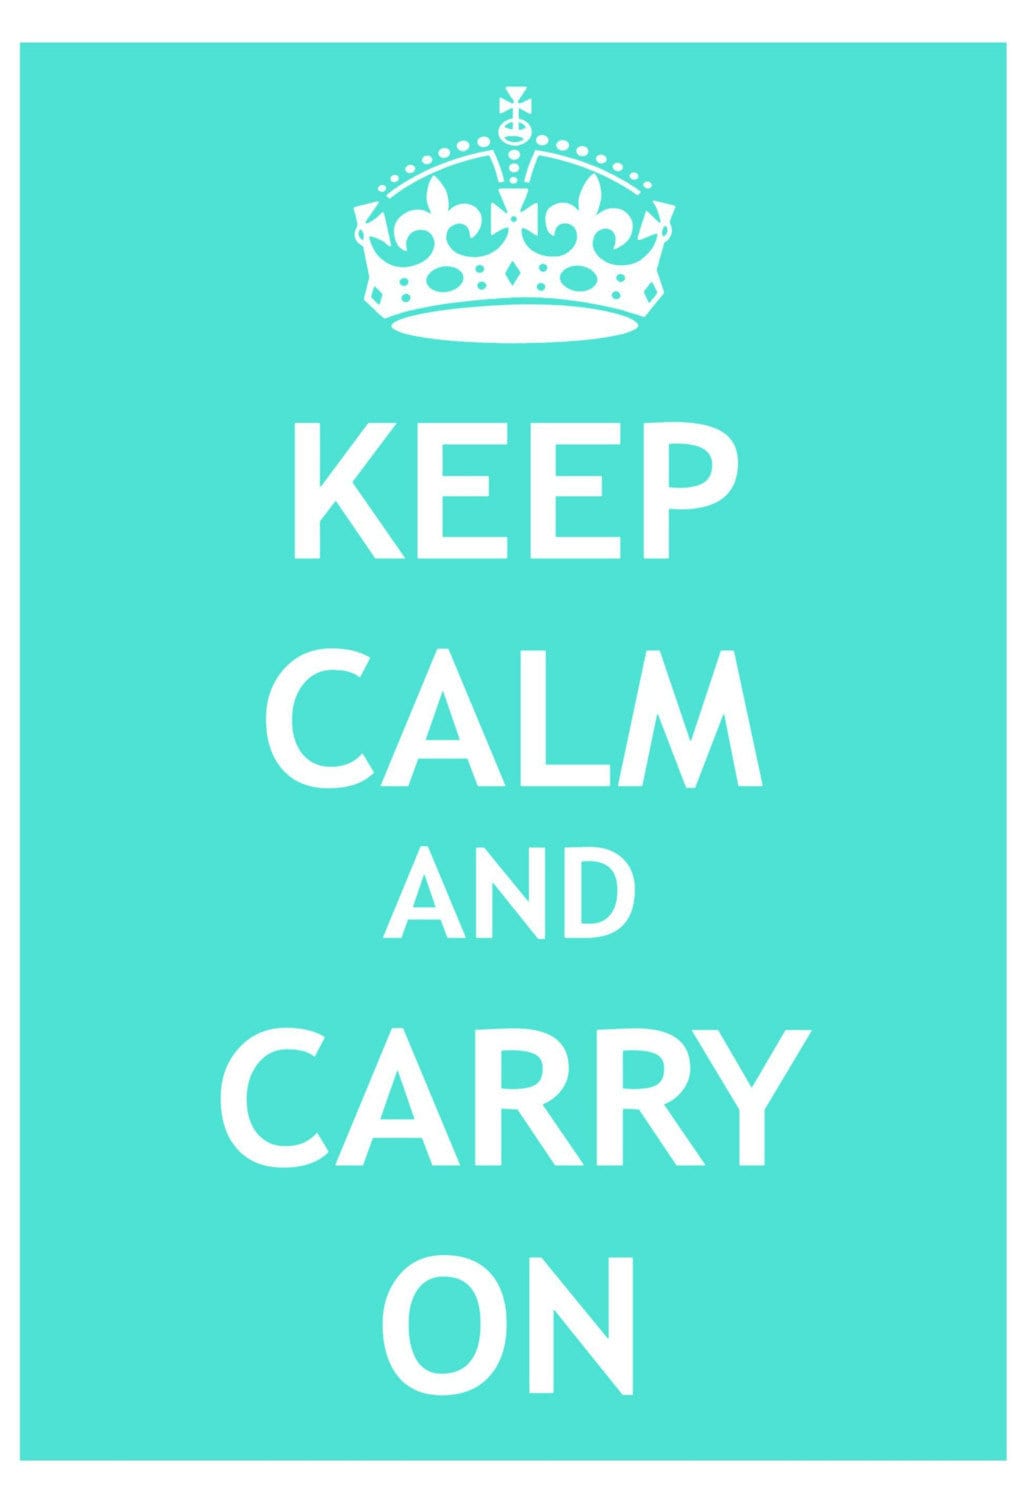 keep calm and carry on meaning